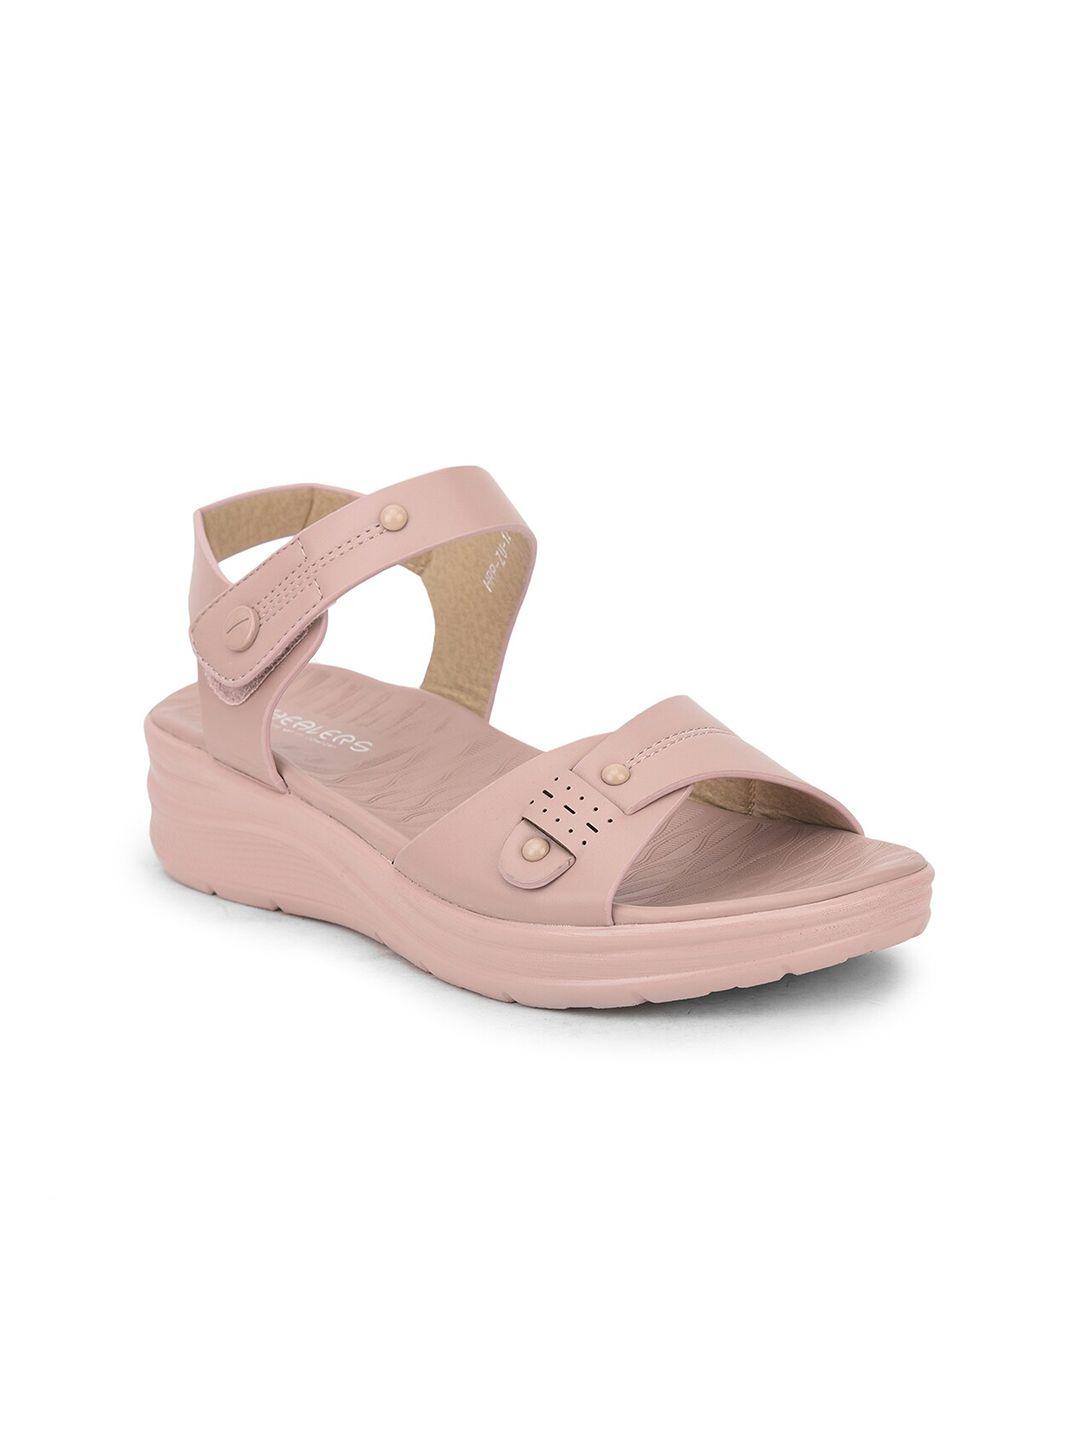 liberty women pink open toe flats with buckles